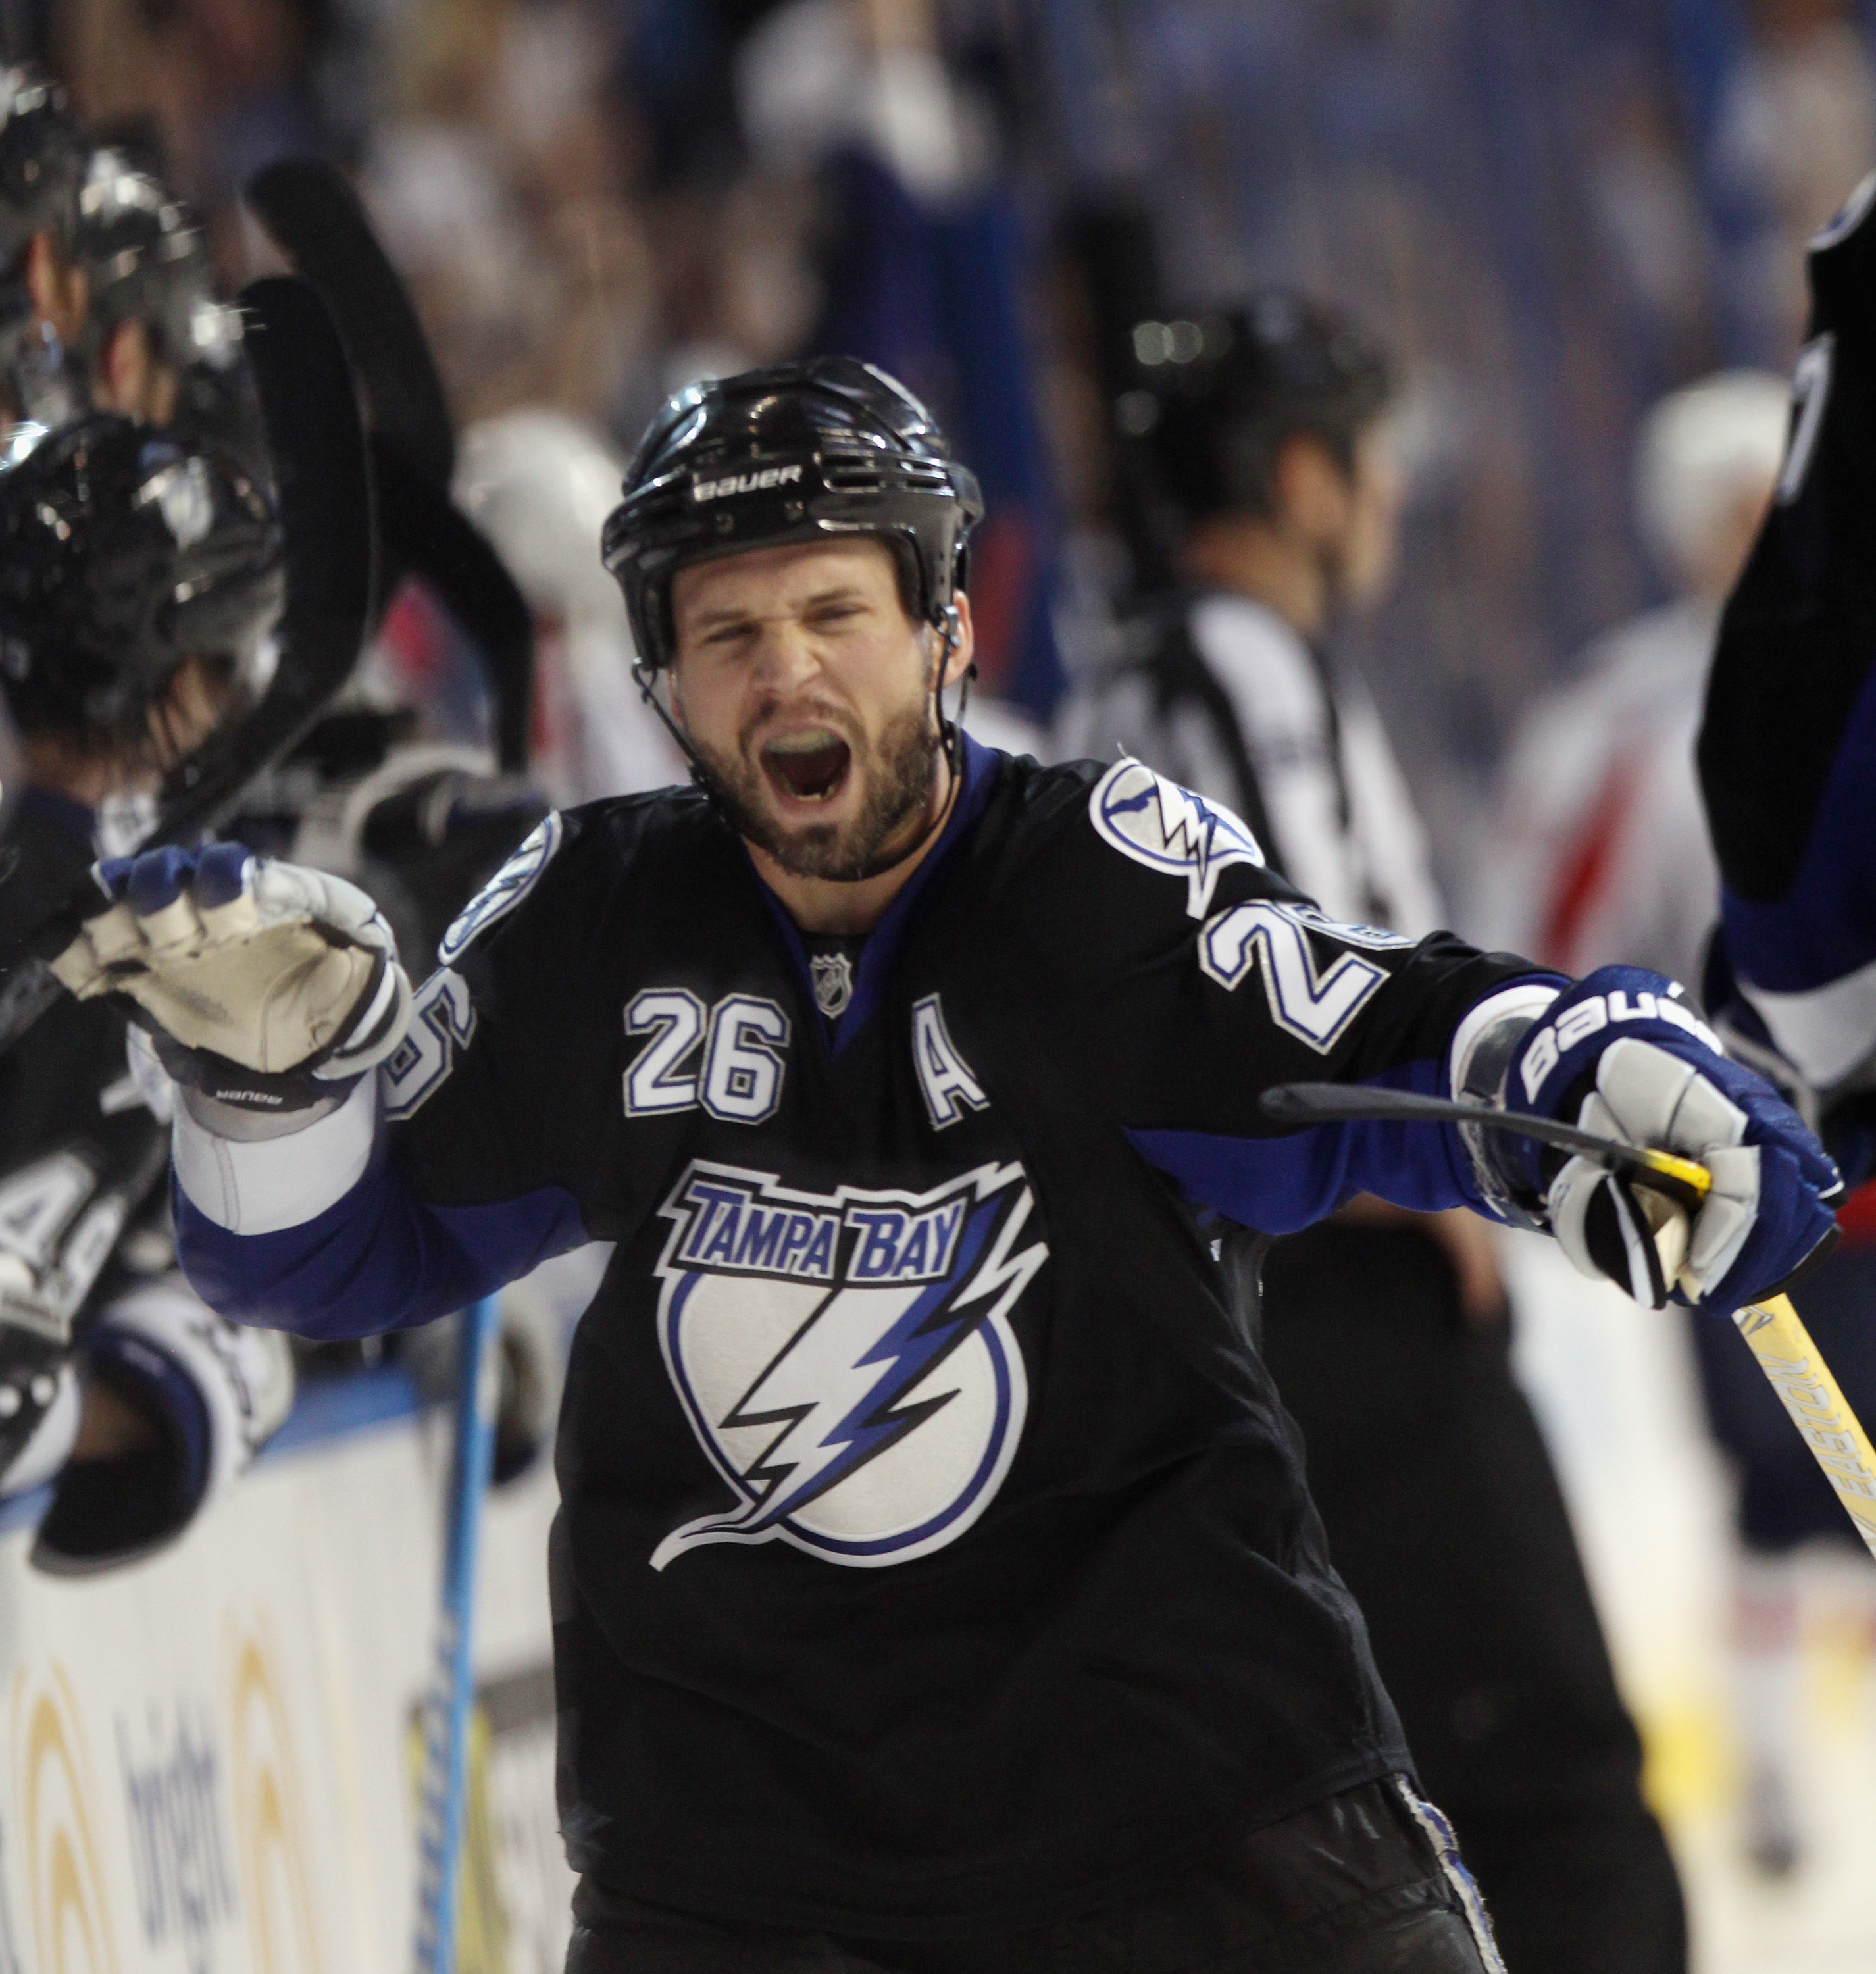 St. Louis wins the series for the Bolts!